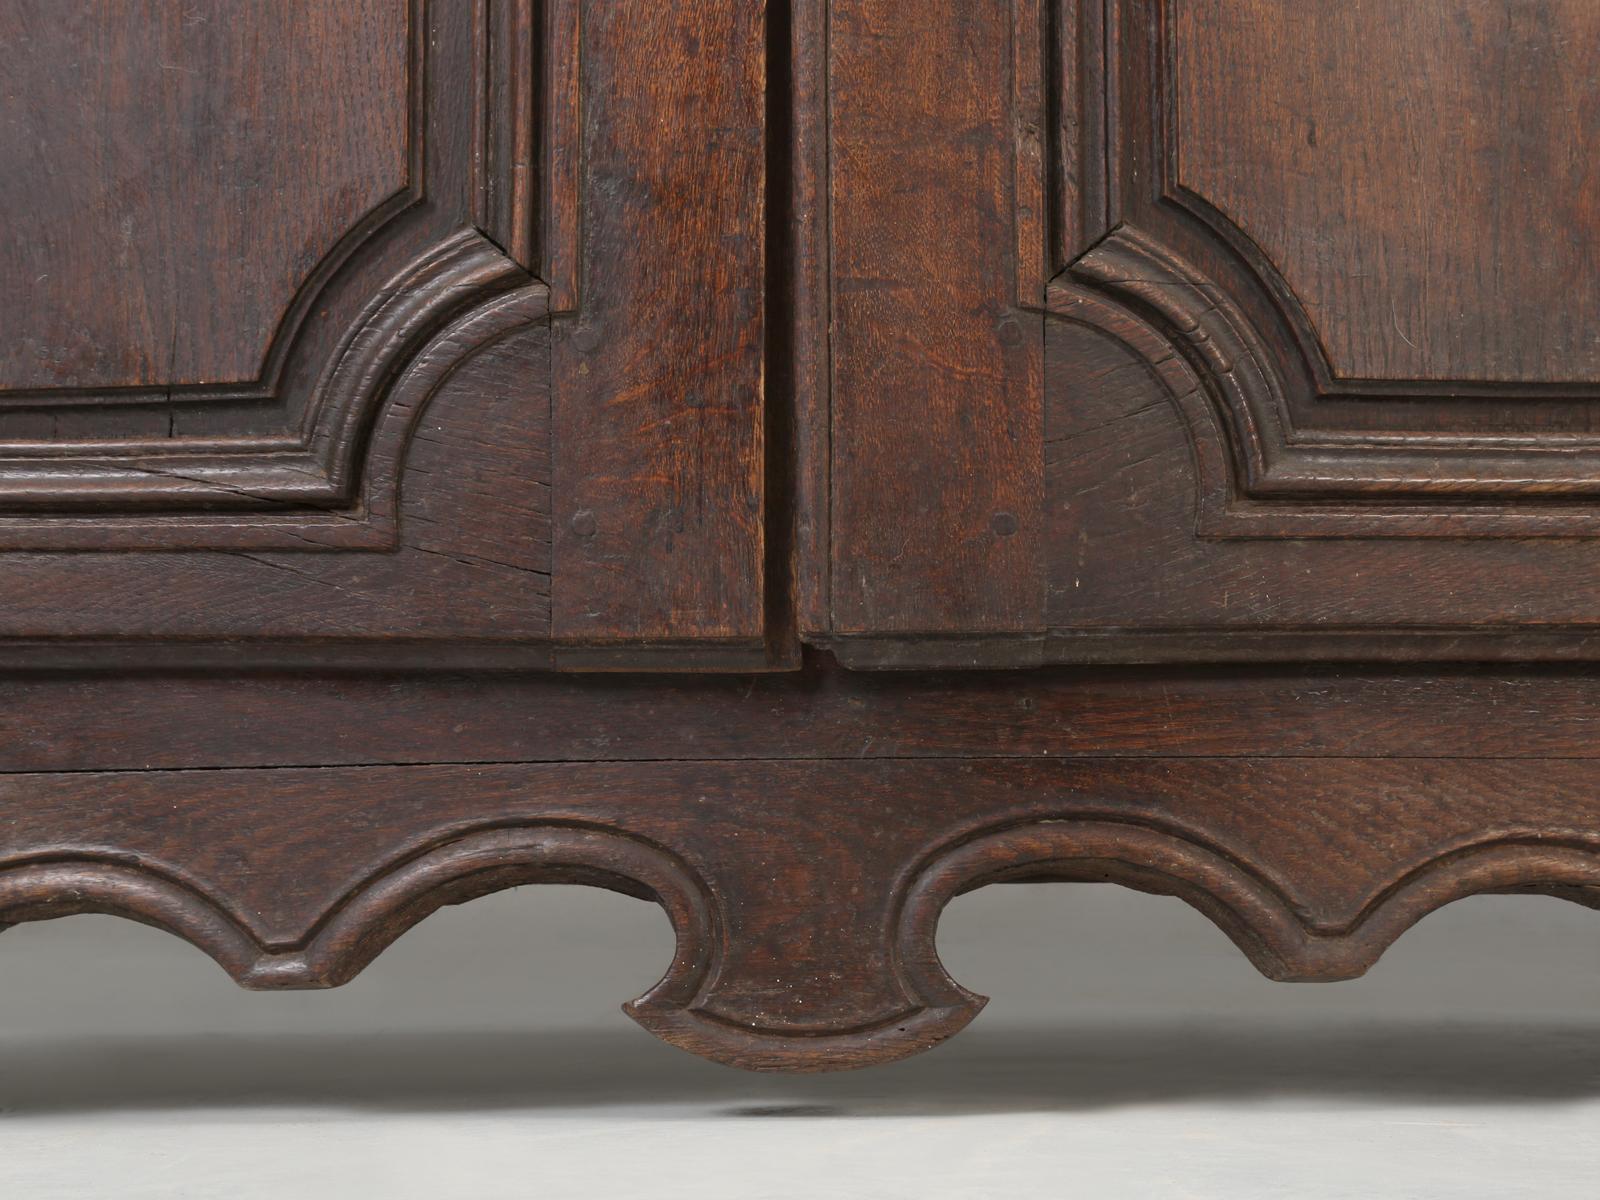 Country French Buffet, Serpentine Front and Completely Original, circa 1700s 10